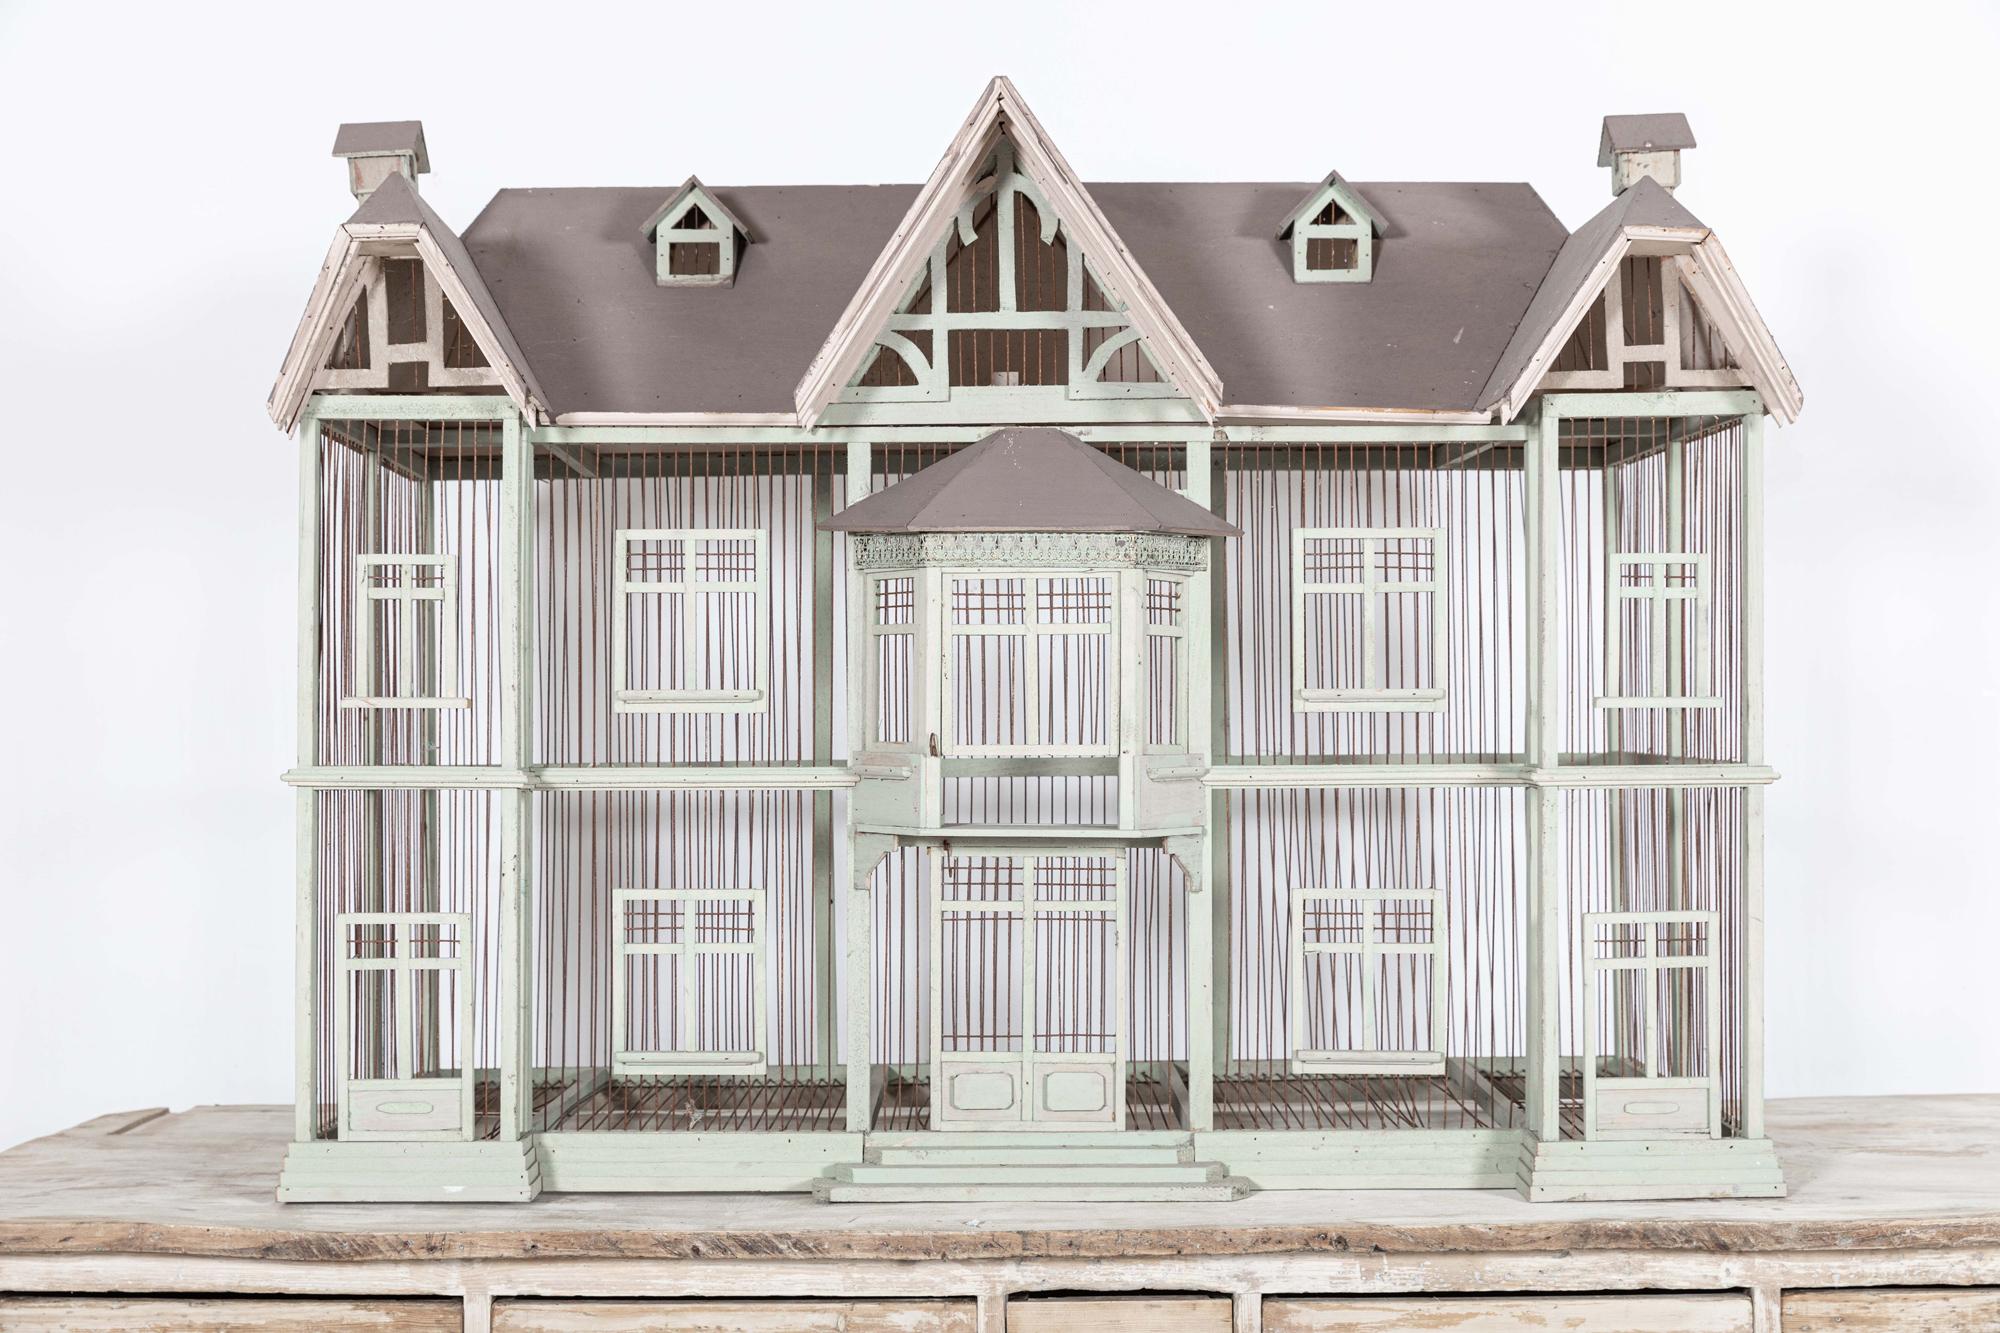 Circa 1920

Monumental Parisian bird cage mansion

Architectural bird house based on a famous Paris Brothel

Sourced in Belgium

 

Measures: W117 x D51 x H90 cm.